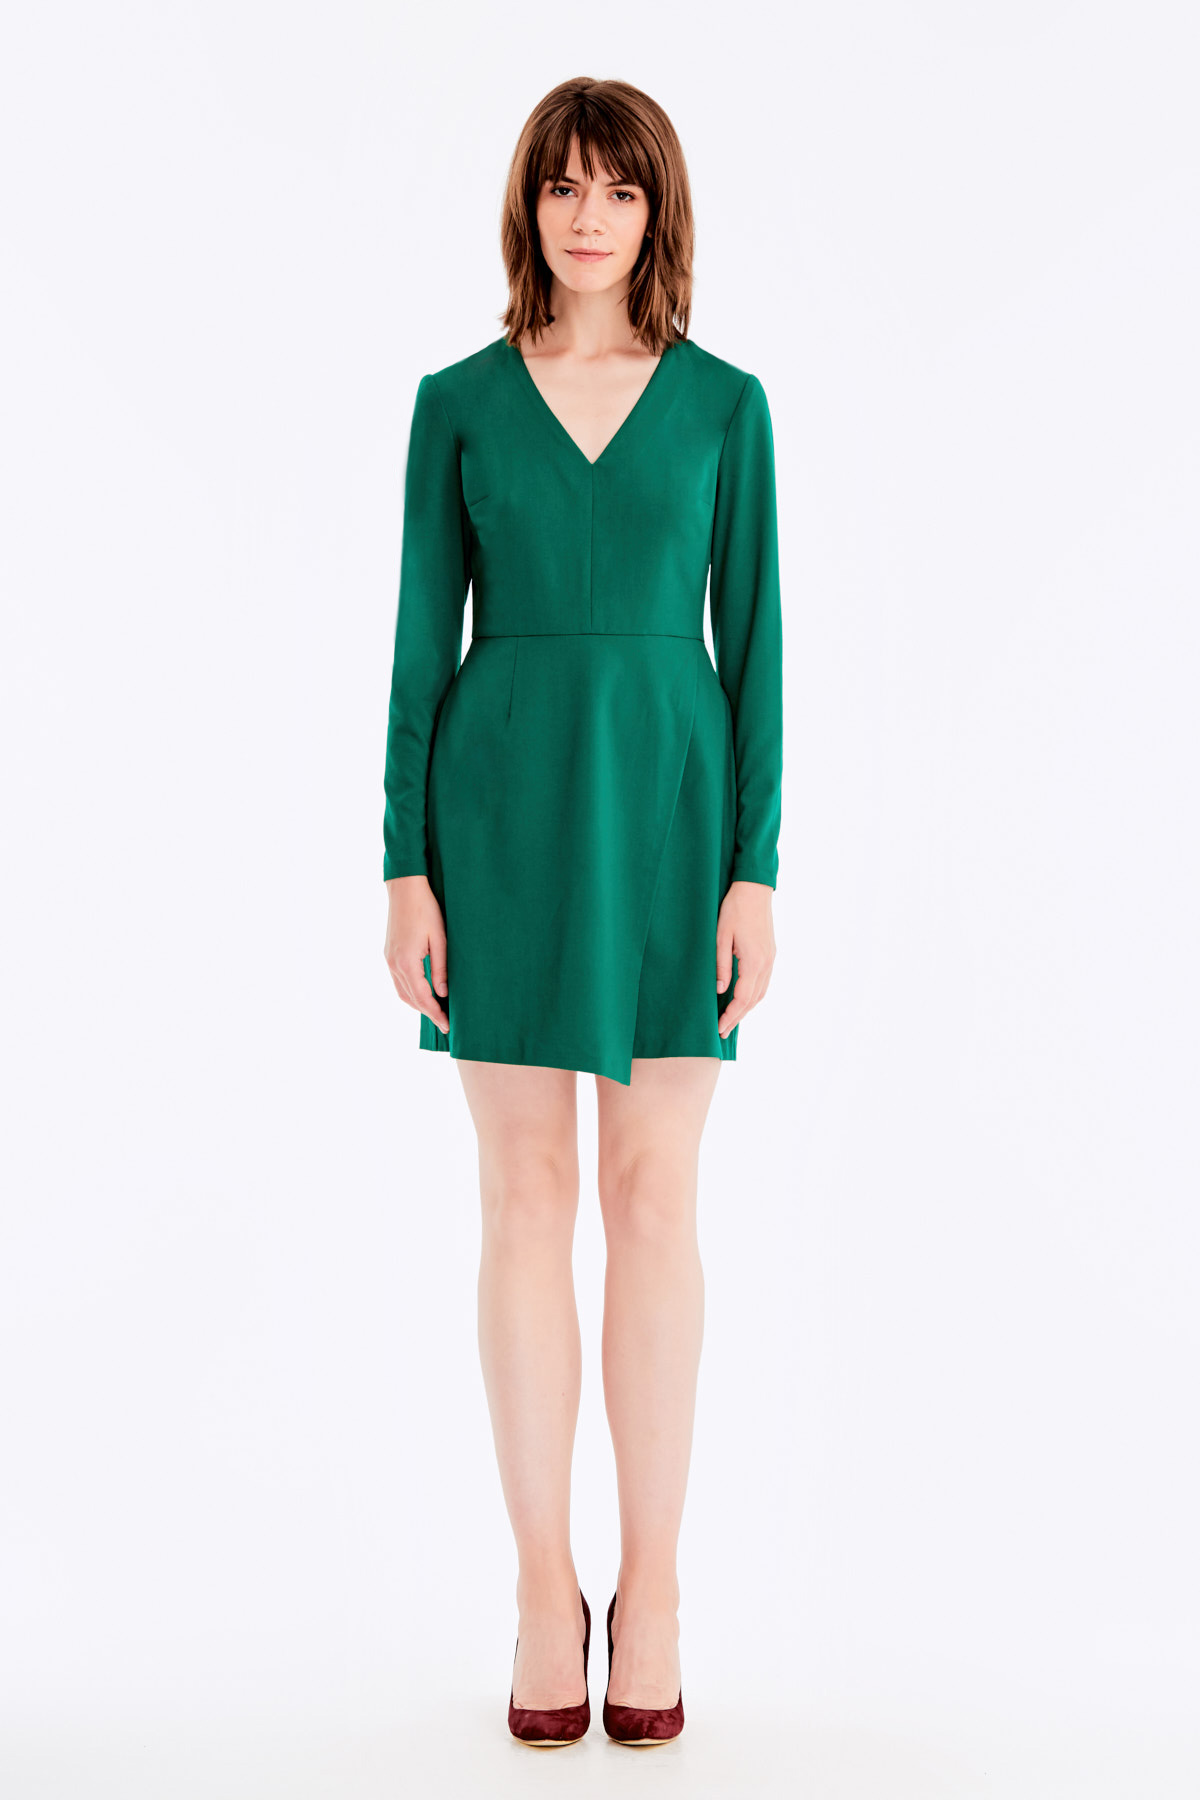 Wrap V-neck MustHave green dress , photo 10